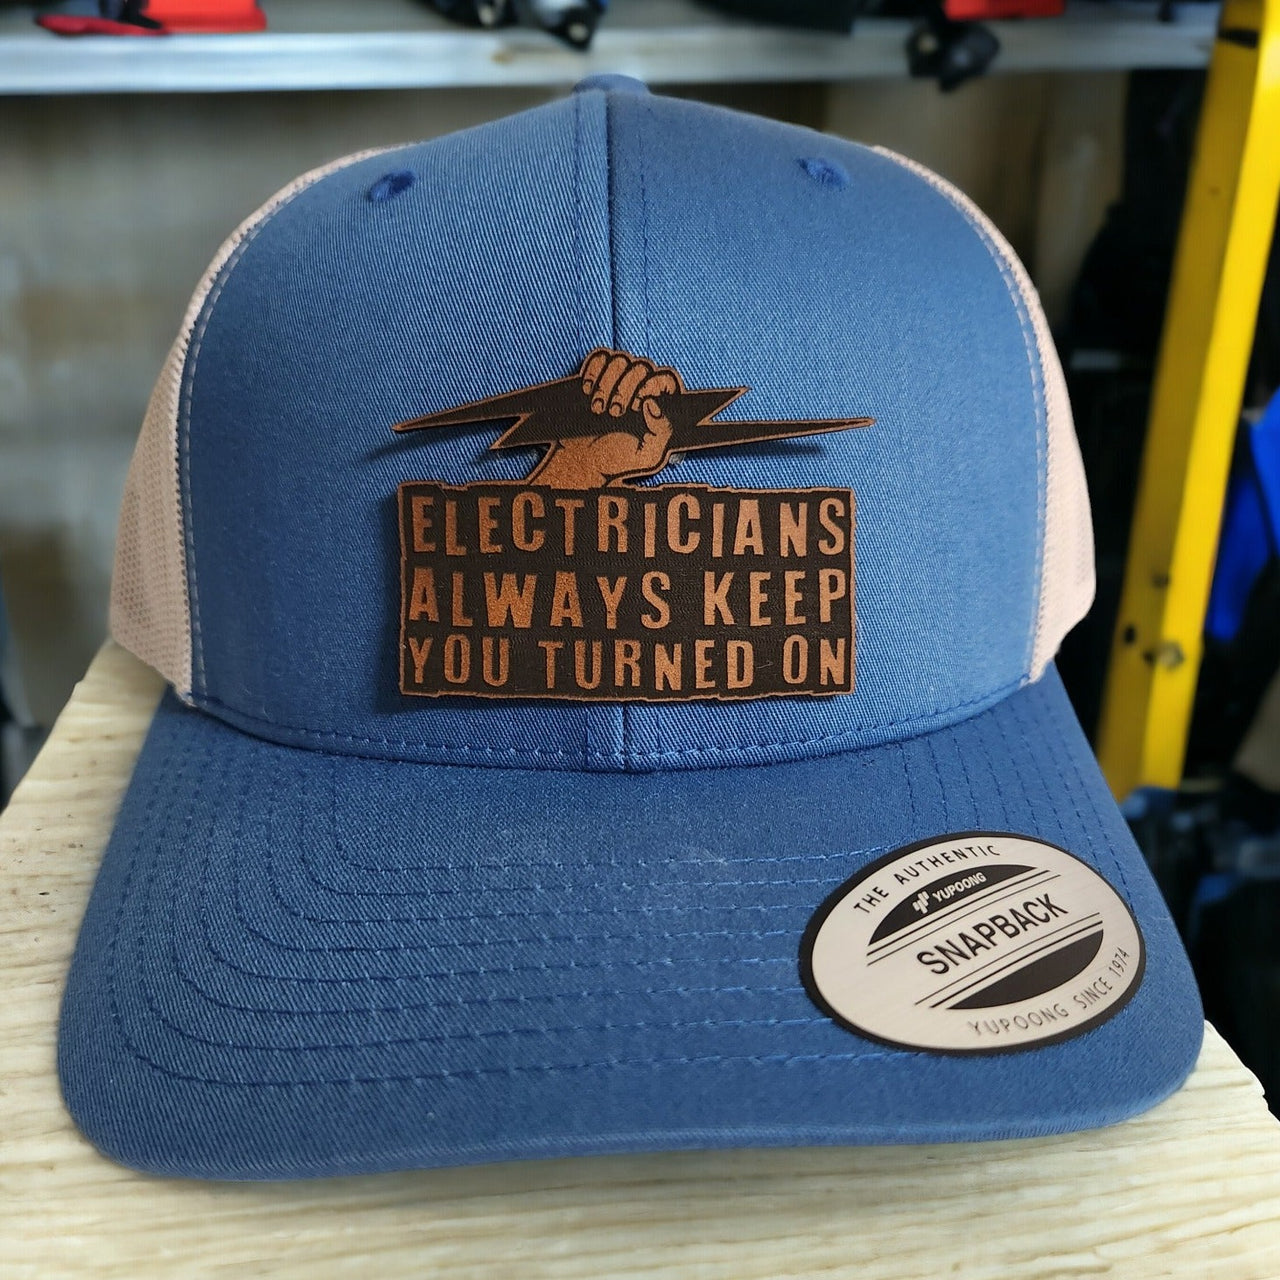 Electricians Always Keep you Turned On Leather Patch Trucker Hat for Electricians